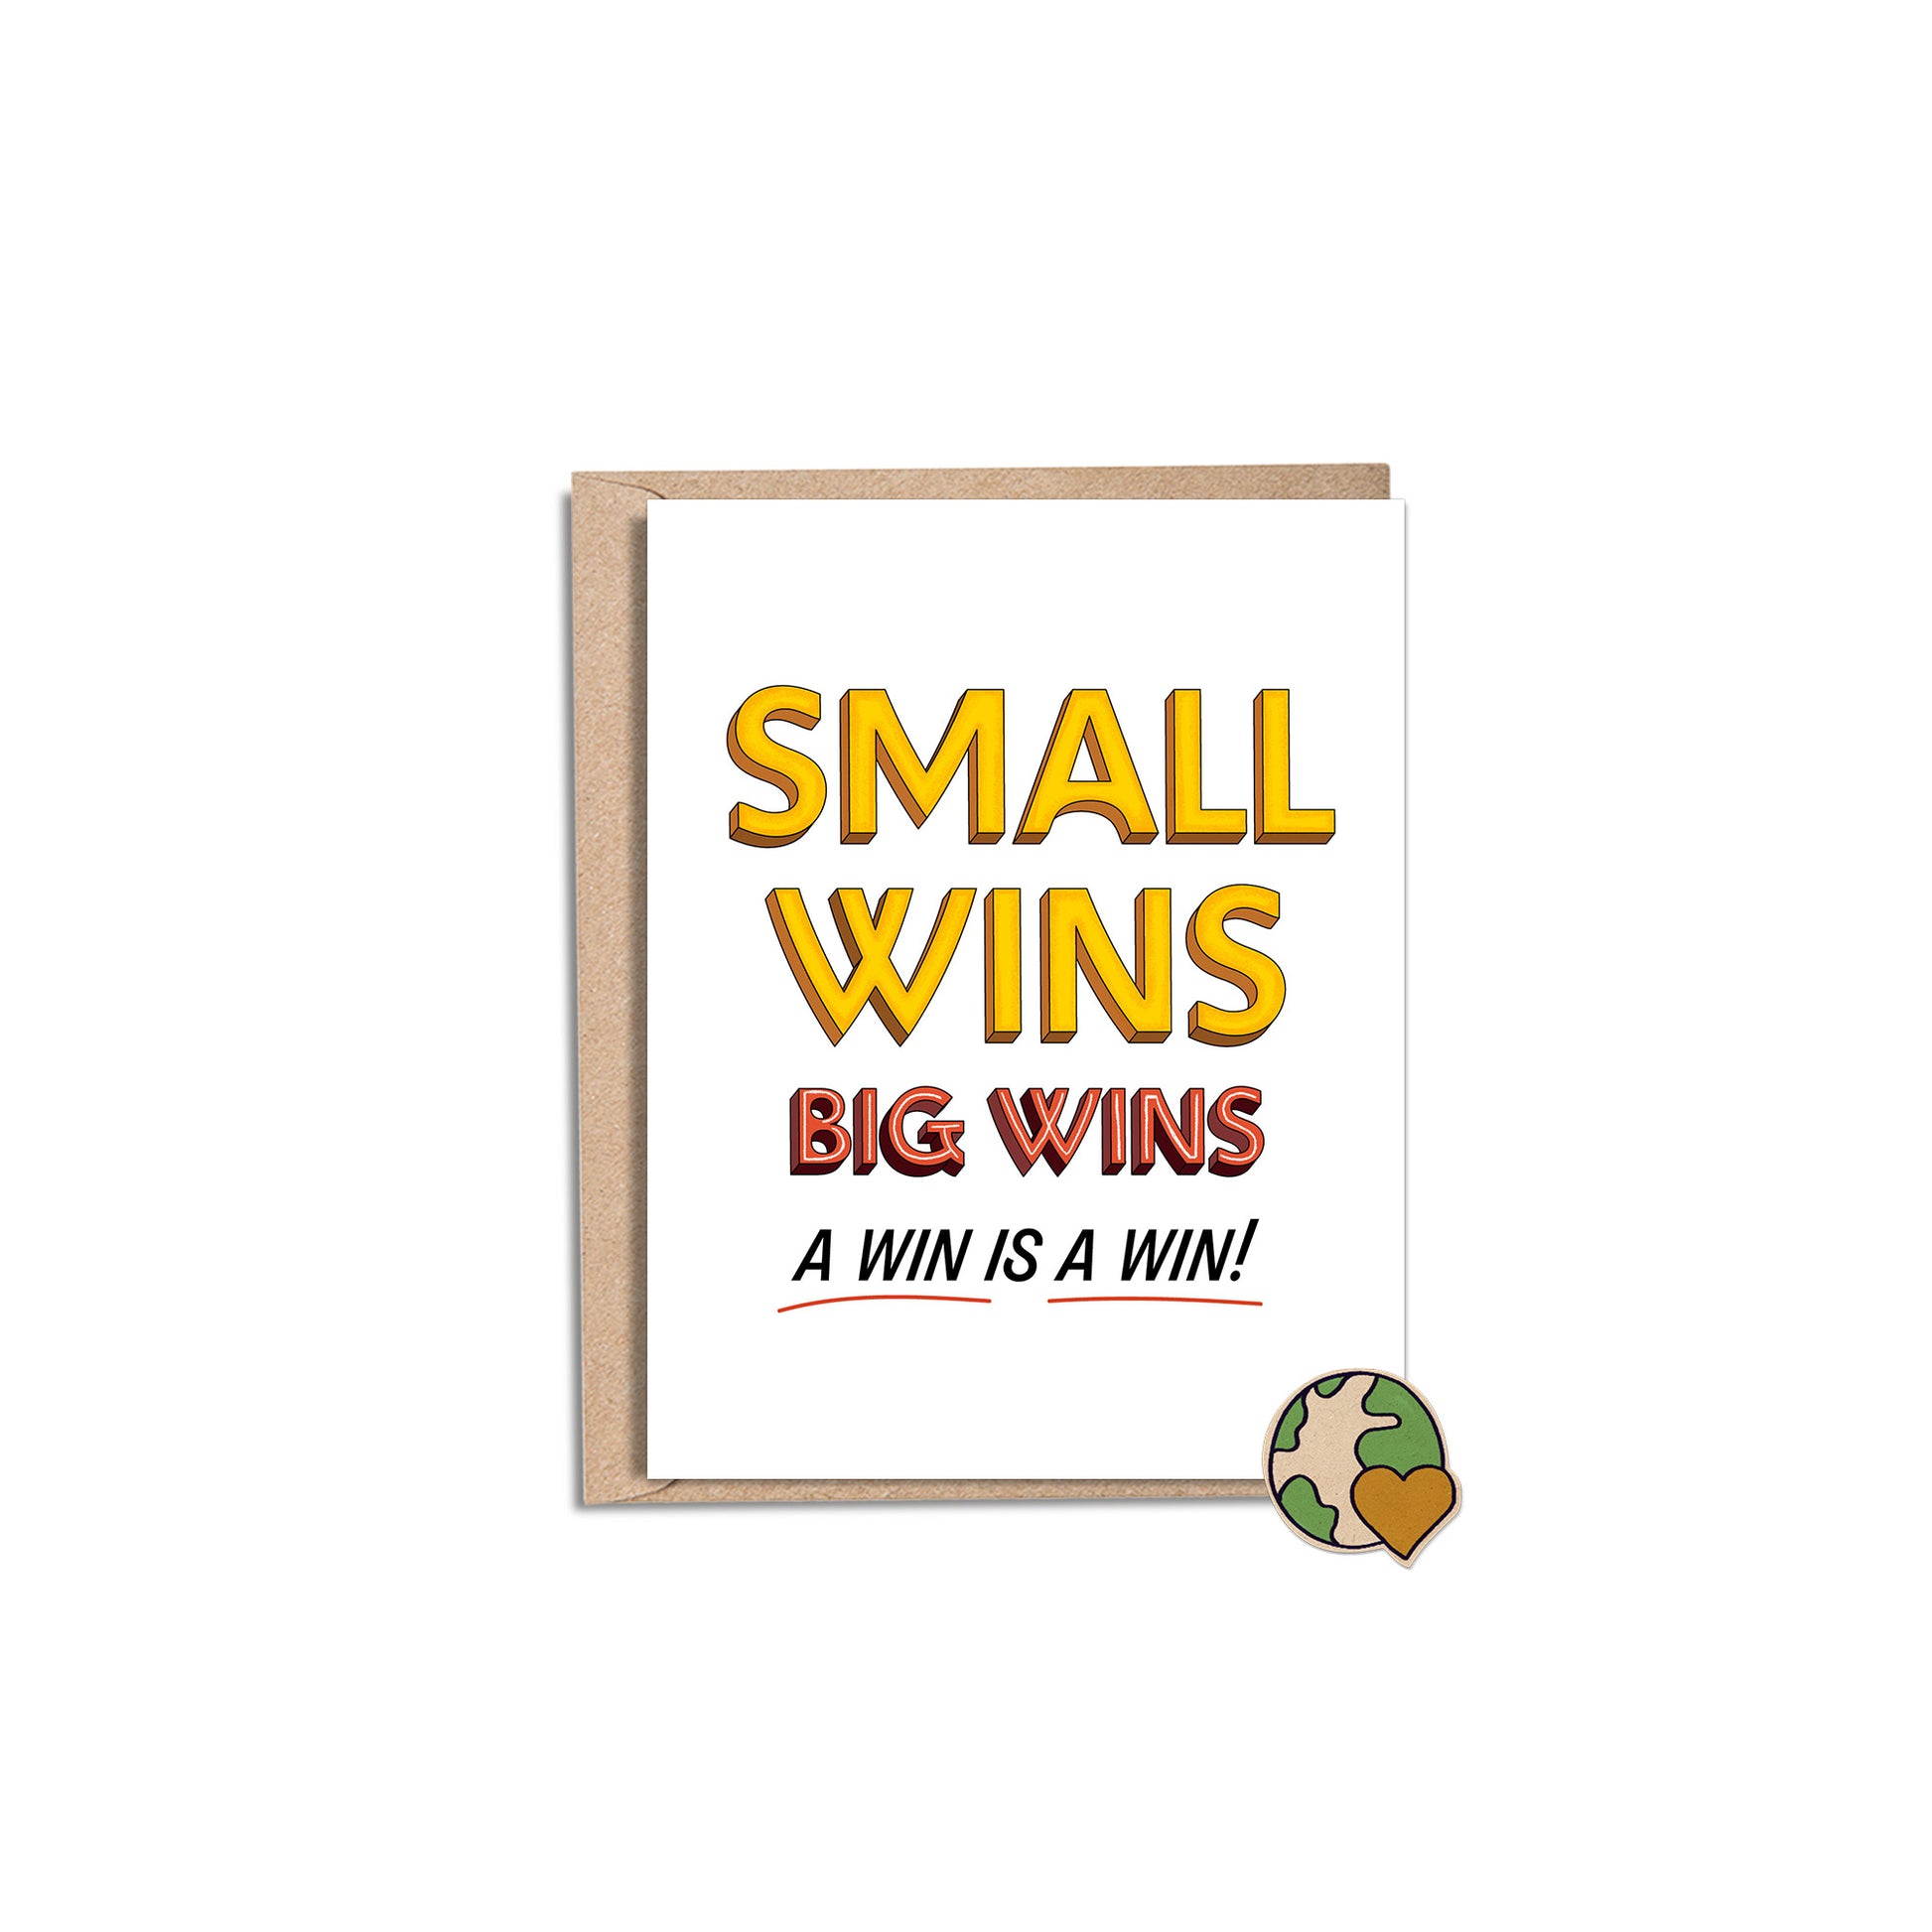 Celebrate Wins 4.25x5.5” A2 Encouraging, celebrate, congratulations, achievement, big opportunity, greeting cards from Goods Made By Digitrillnana, Ashley Fletcher. Black Woman Owned. Perfect card to cheer on or celebrate a friend!